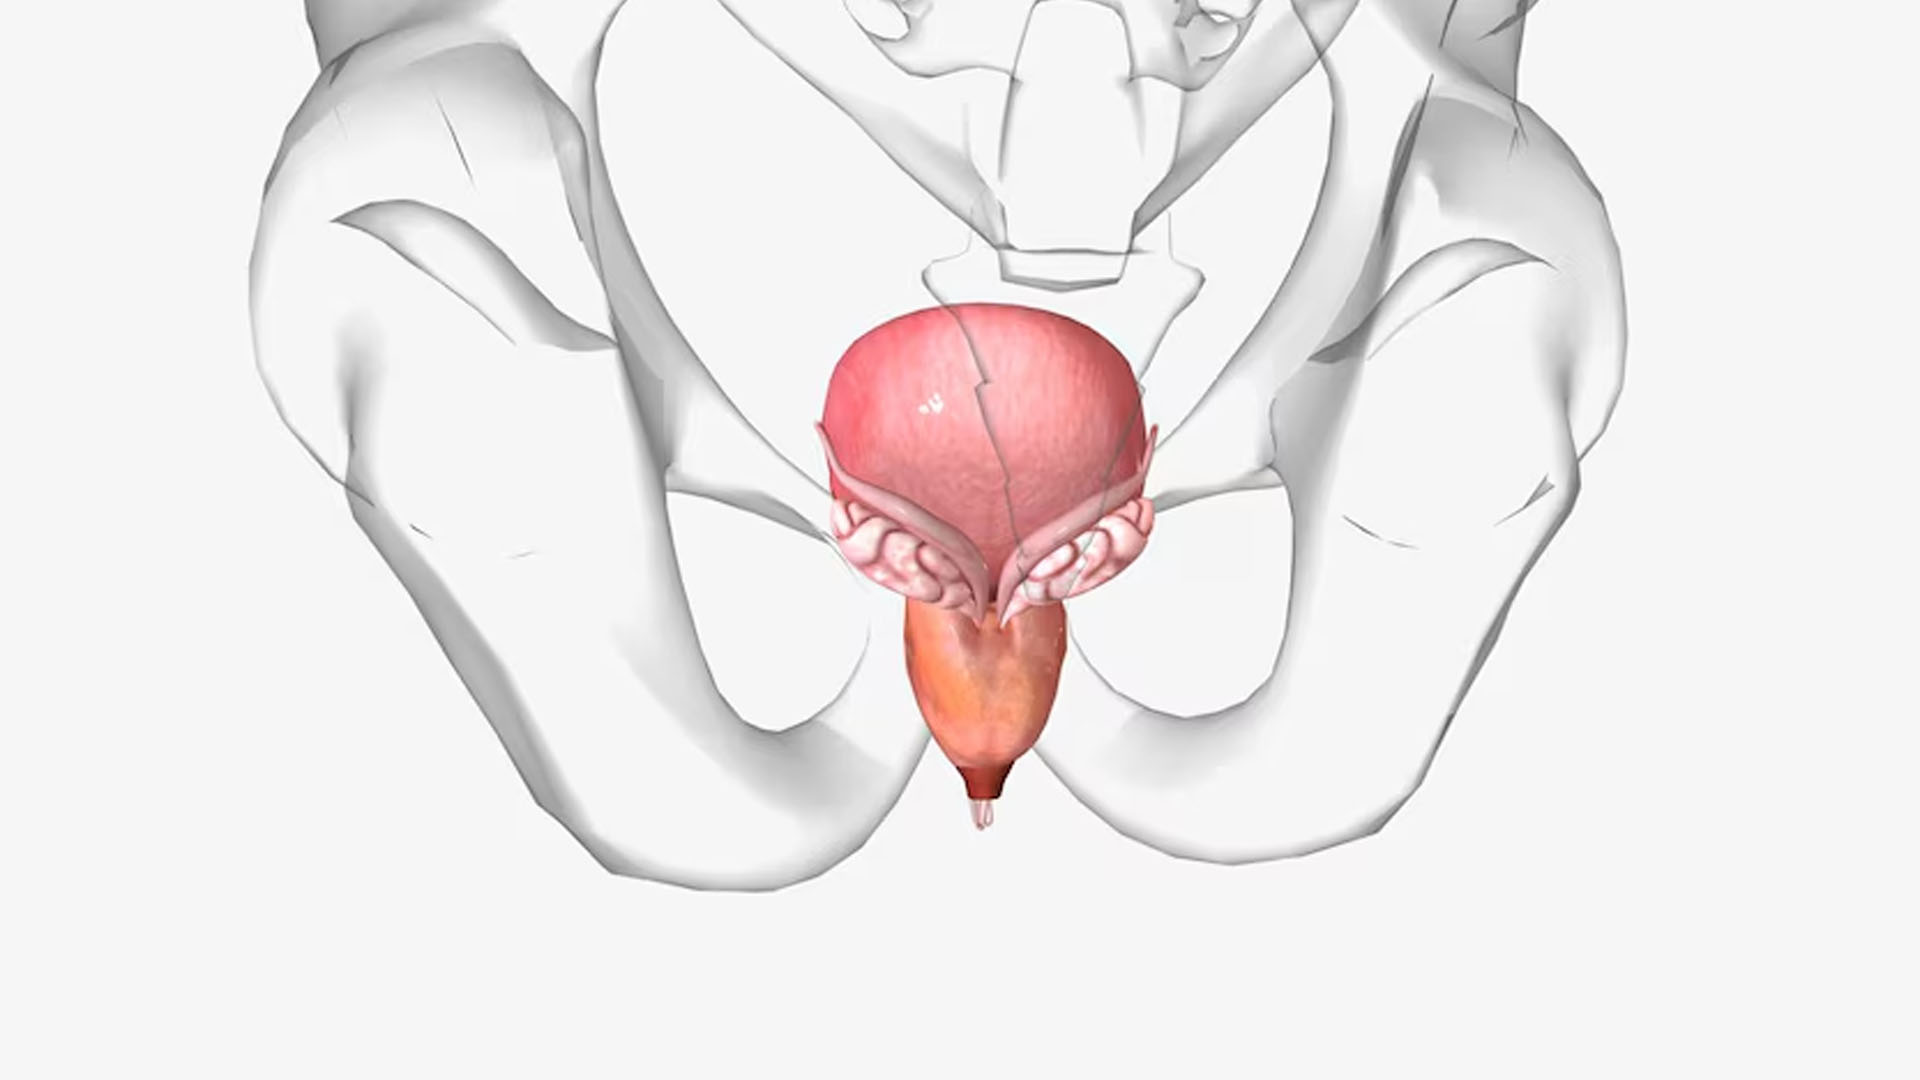 What are the Home Remedies for Anal Fistula?